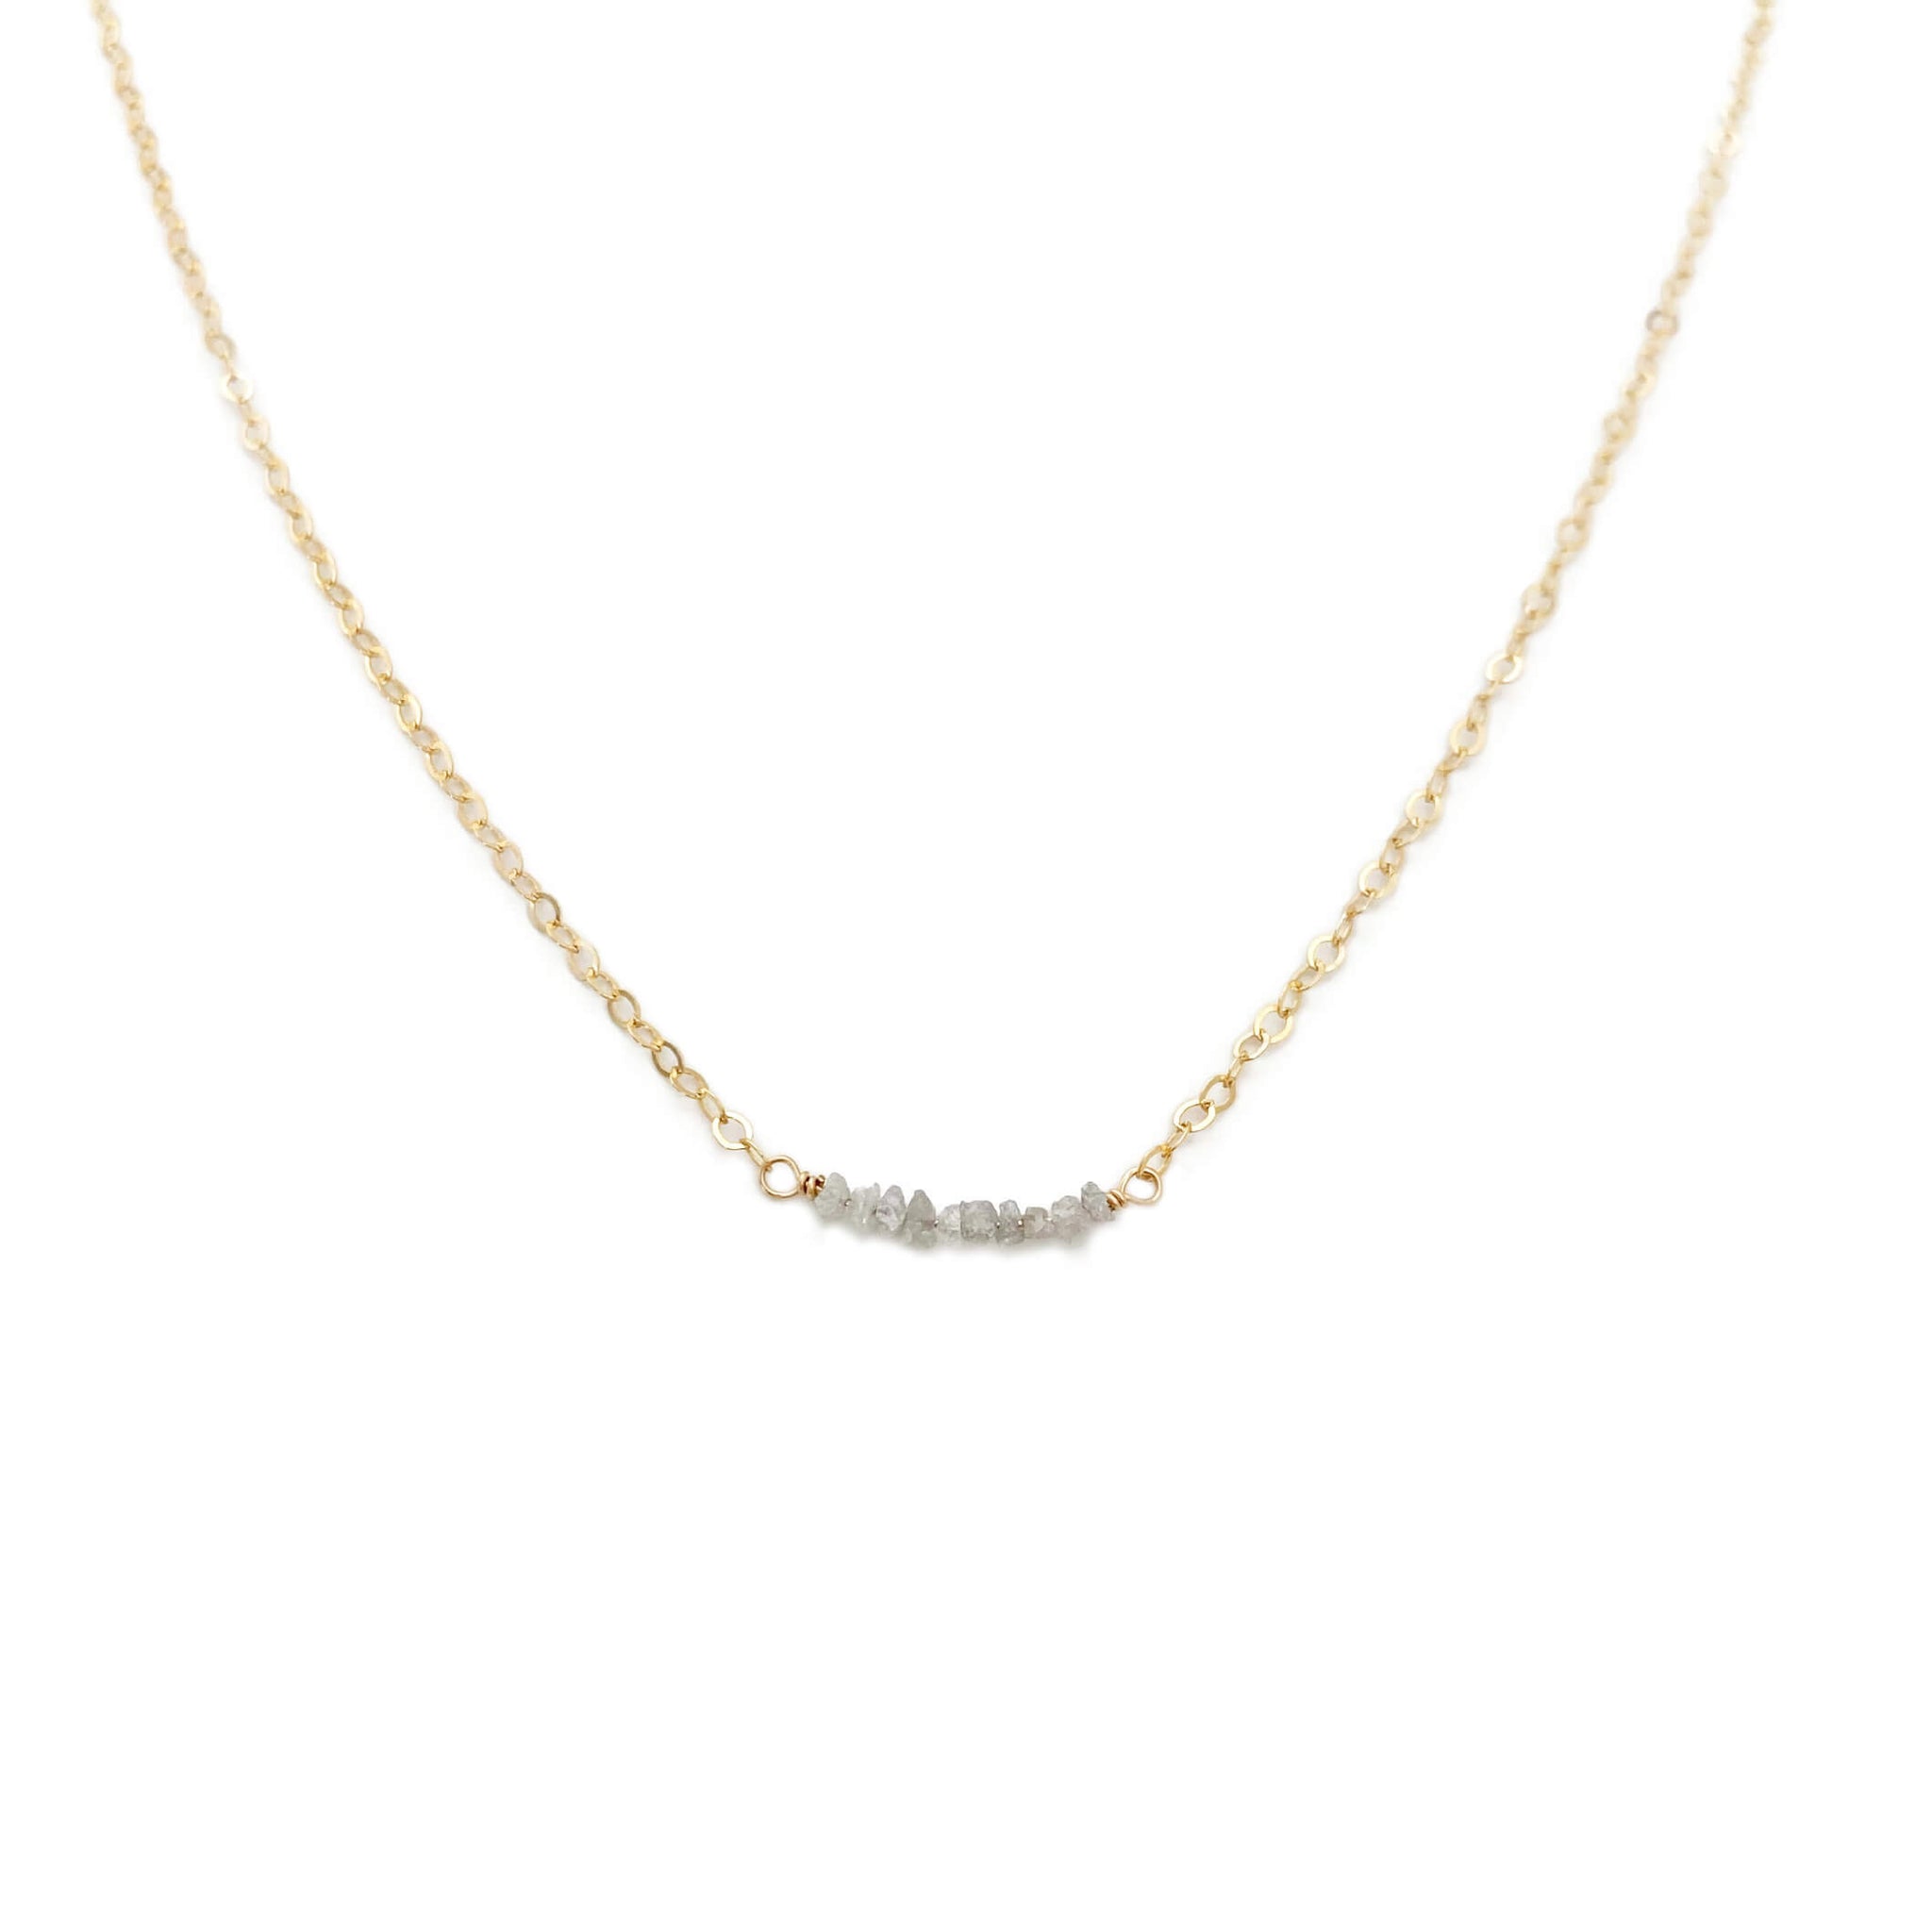 The dainty diamond bead necklace is made with hand selected raw diamonds and 14k gold chain.  We can also custom make it in sterling silver or gold filled chain.